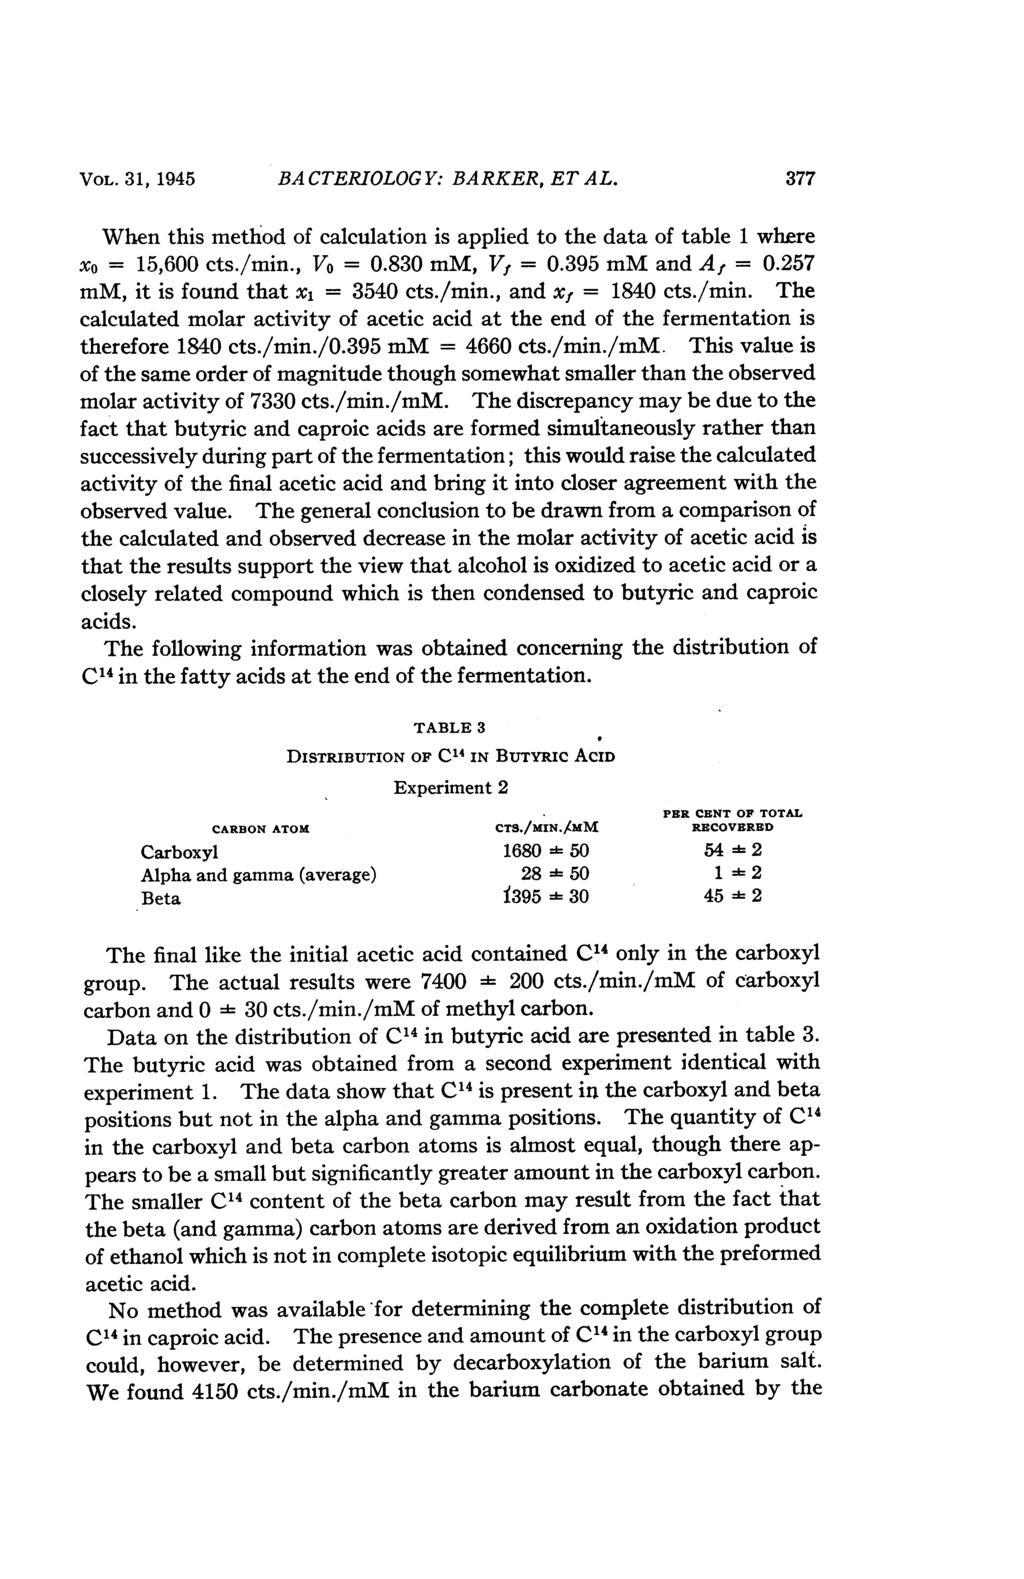 VOL. 31, 1945 BA CTERIOLOG Y: BARKER, ET AL. 377 When this method of calculation is applied to the data of table 1 where xo = 15,600 cts./min., Vo = 0.830 mm, Vf = 0.395 mm and Af = 0.